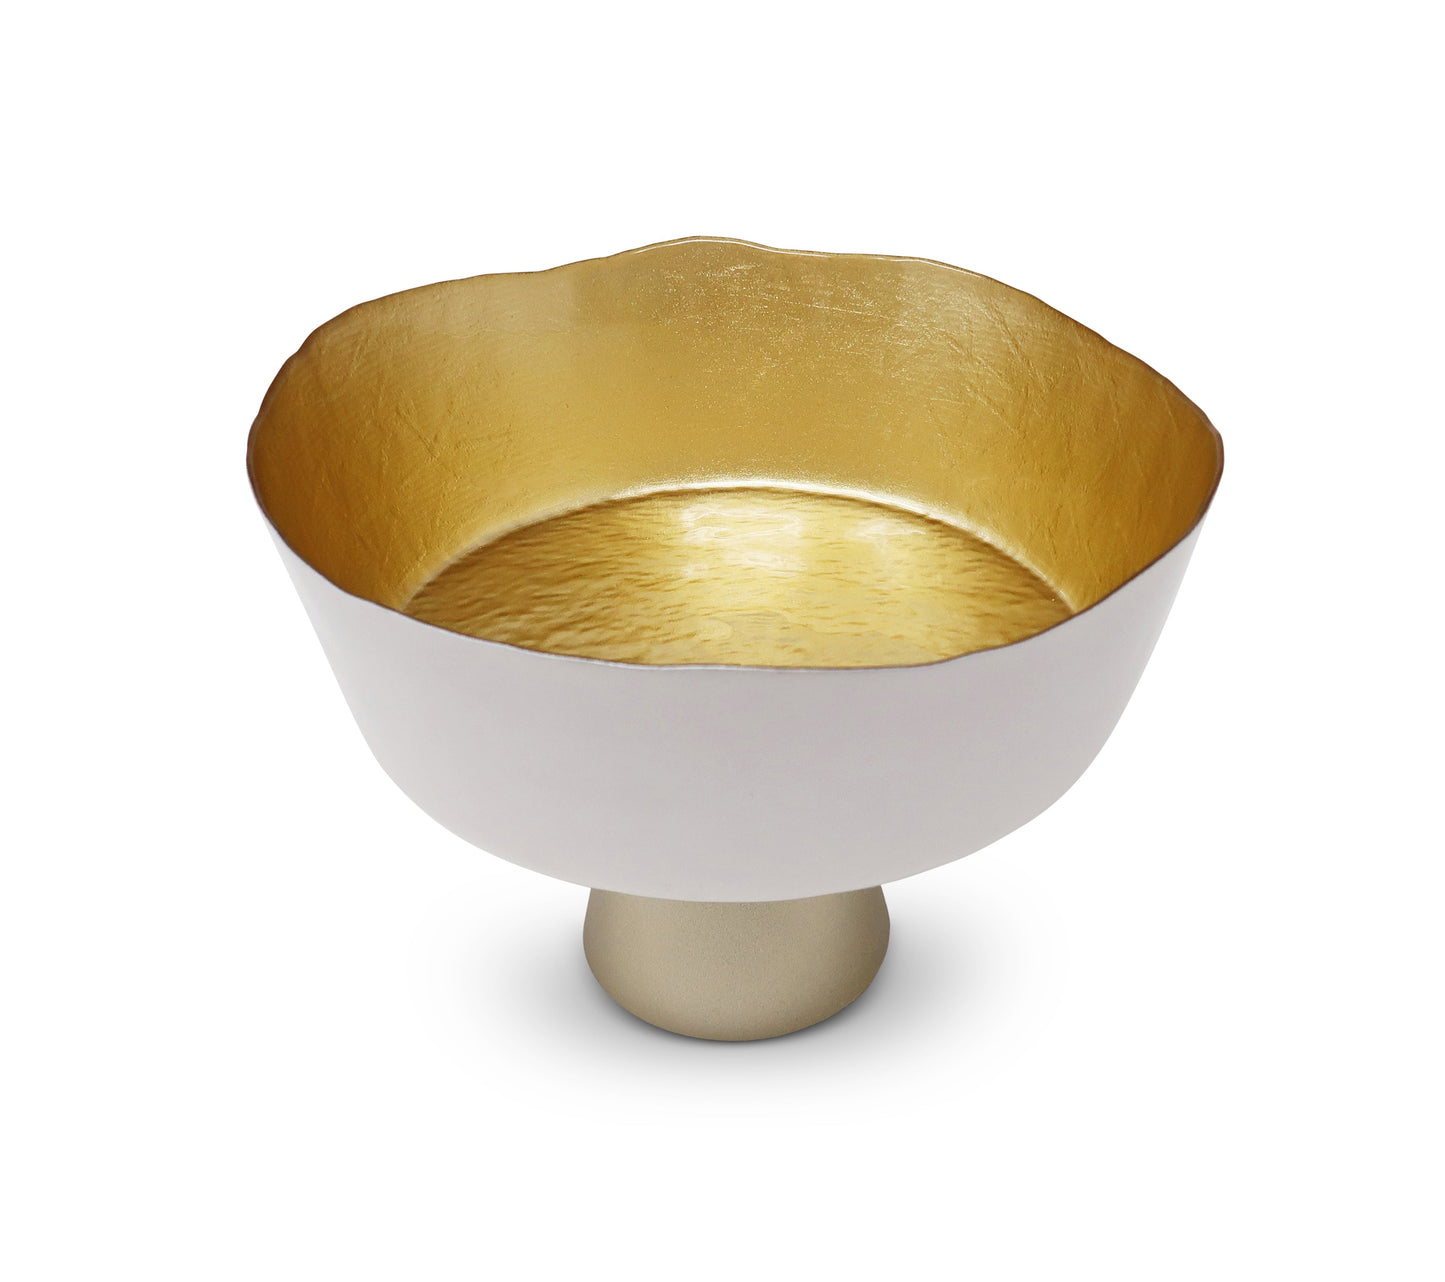 Organic Shaped Footed Bowl with Gold